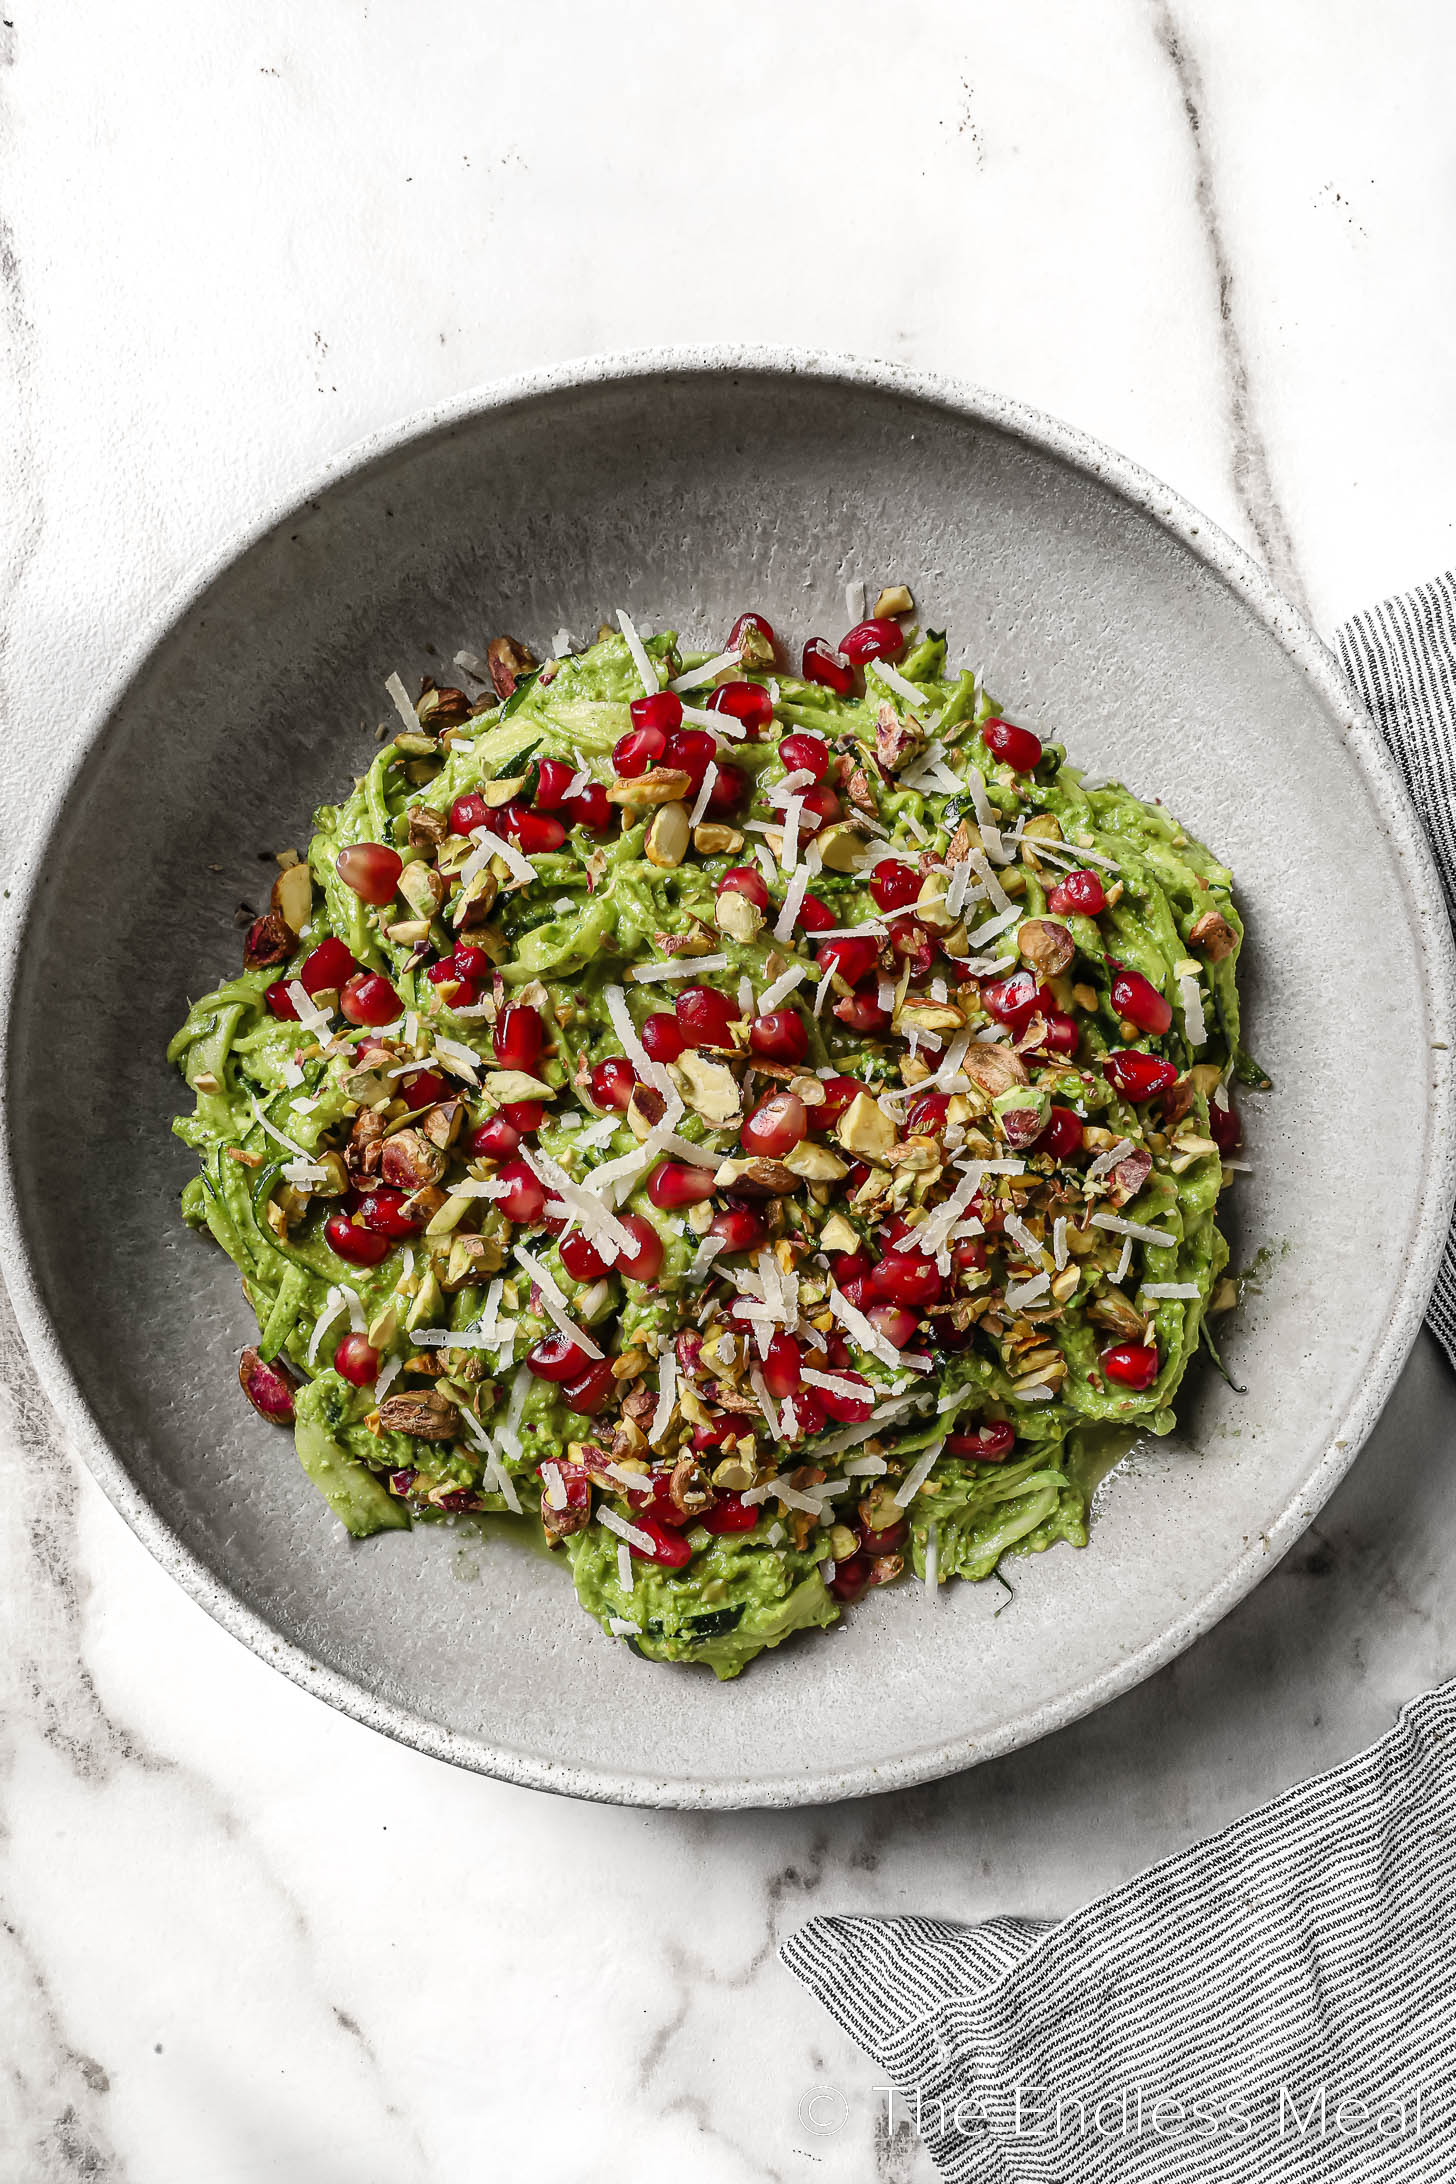 Zucchini noodles with pesto in a bowl with pomegranate and pistachios